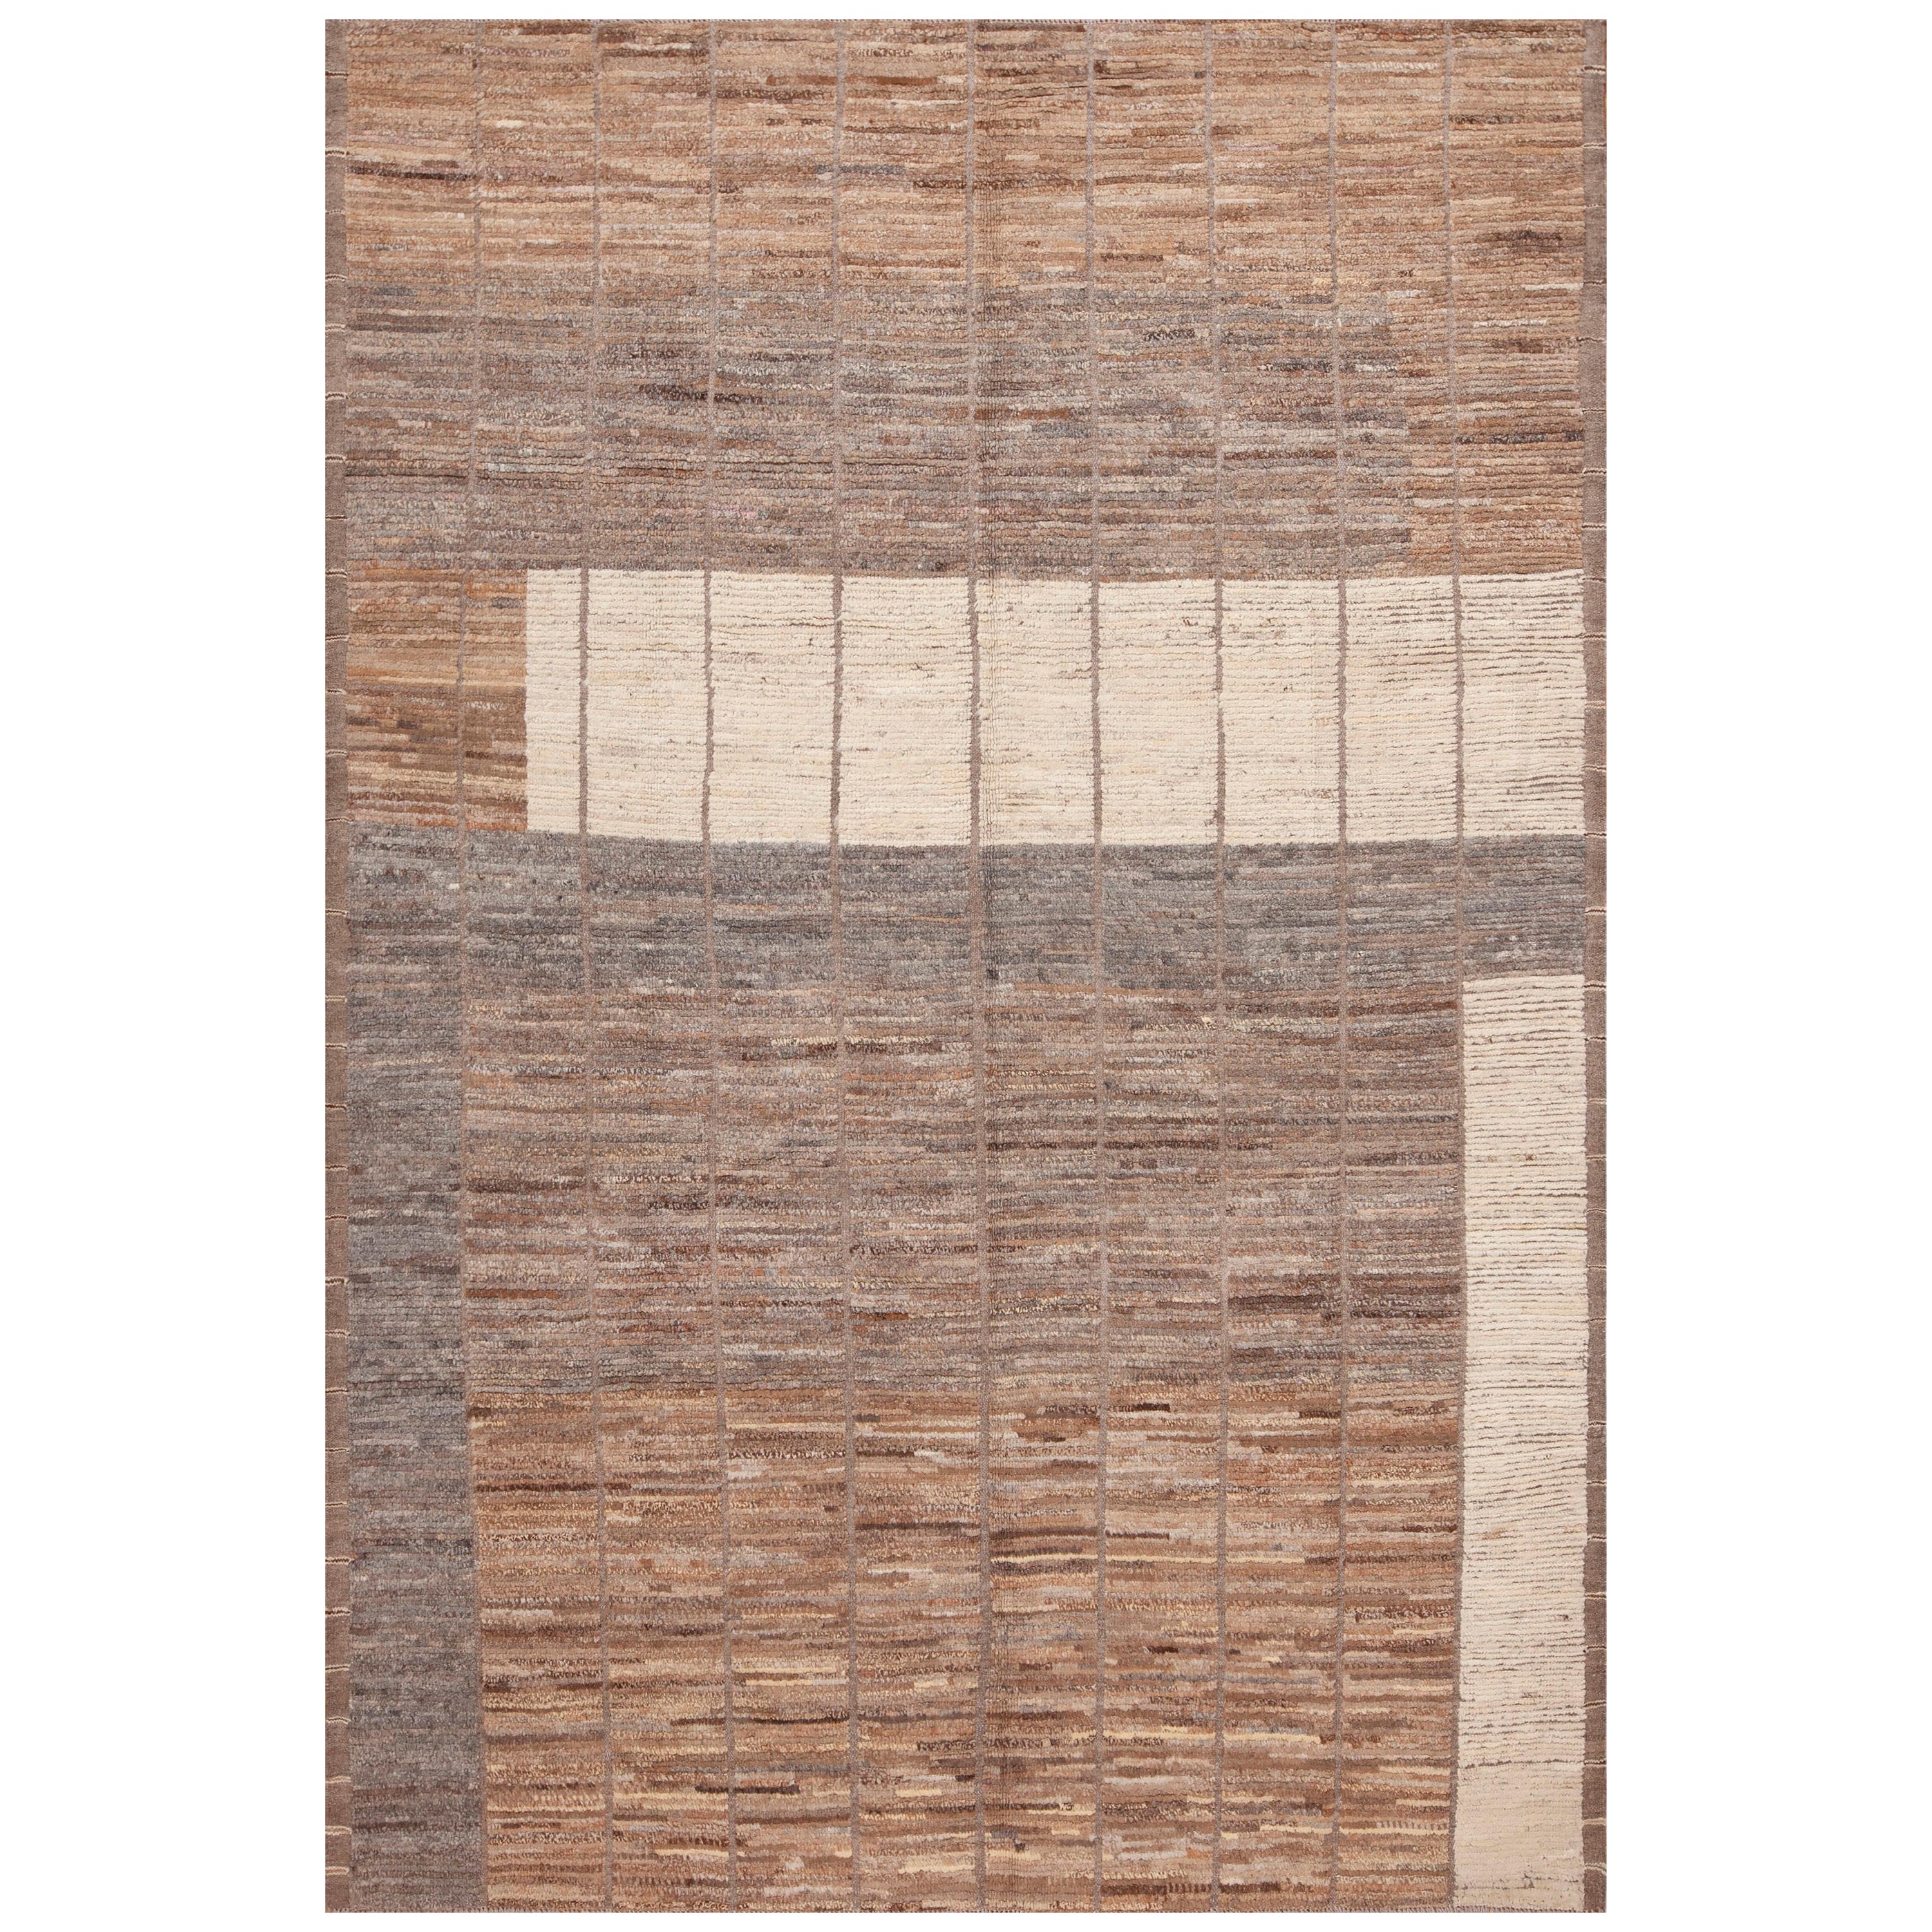 Nazmiyal Collection Neutral Earth Color Modern Contemporary Area Rug 6'2" x 9'1" For Sale